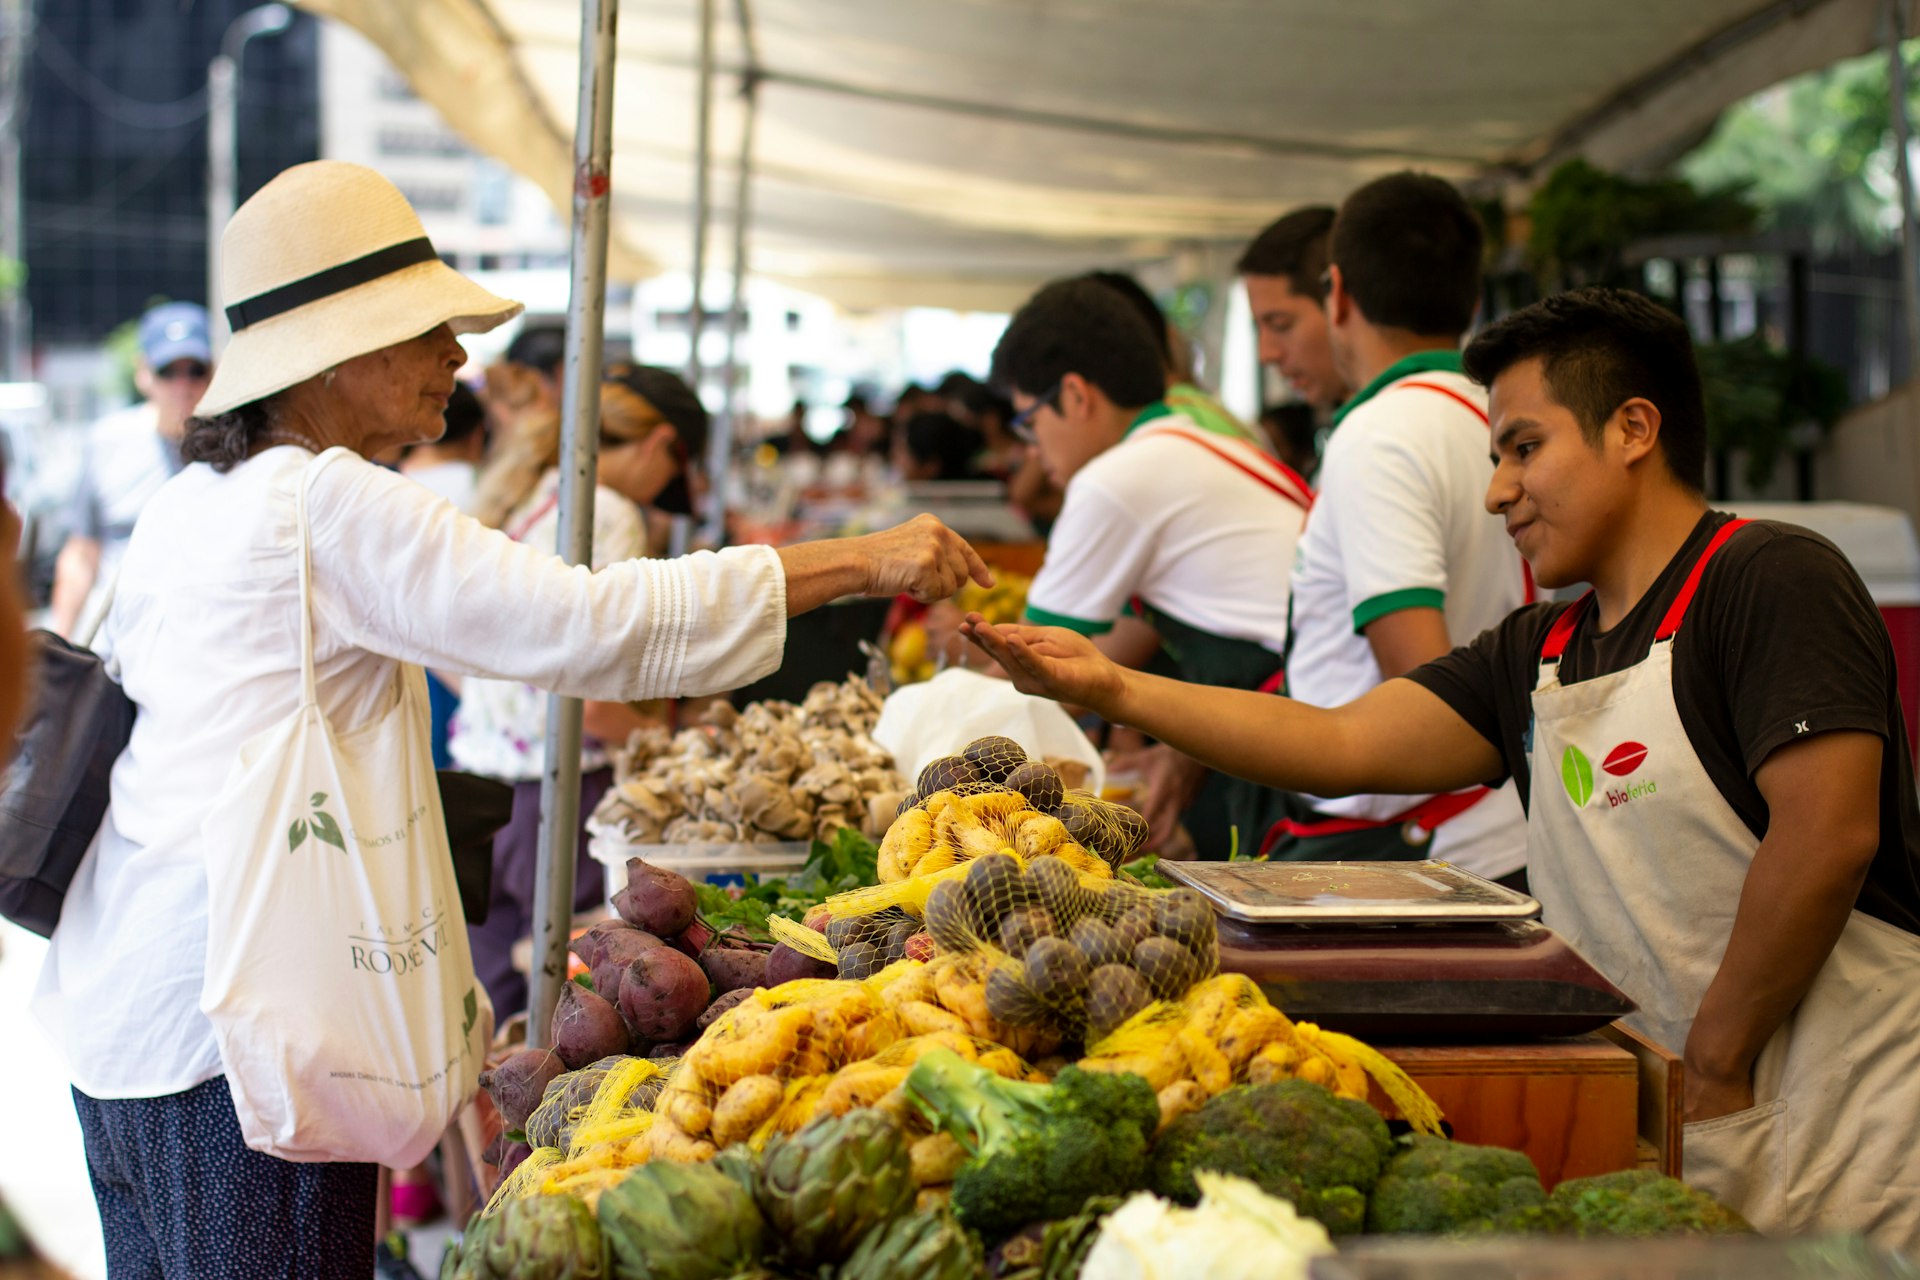 A woman in a white shirt and hat hands money to a vegetable seller at a market in Milaflores, Lima, Peru